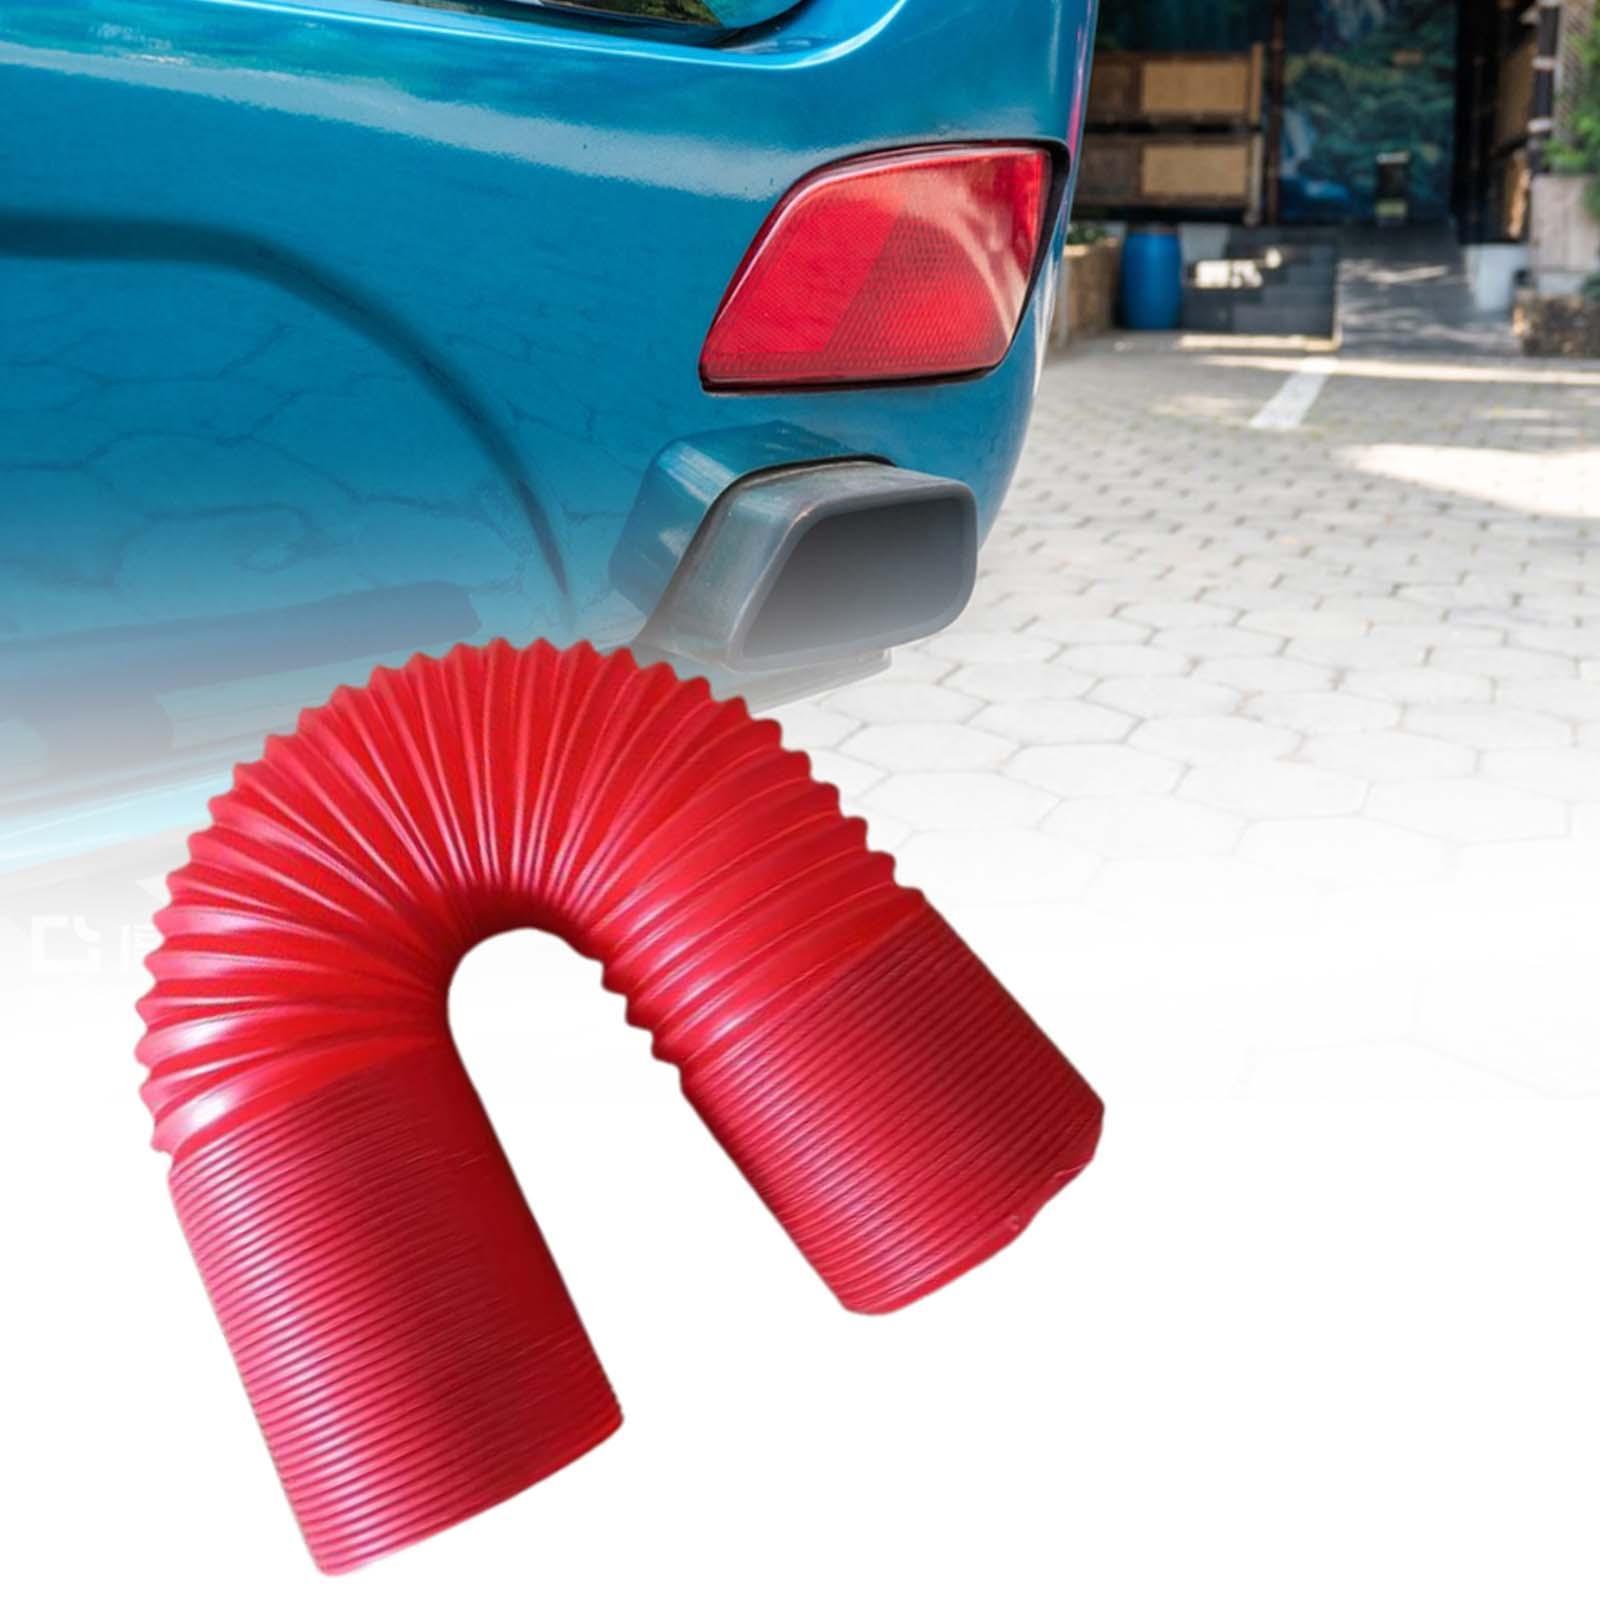 Car Flexible Air Intake Hose Pipe Universal Car Parts, Air Intake System Cold Air Ducting feed Hose, Flexible Expansion Pipe for Vehicles